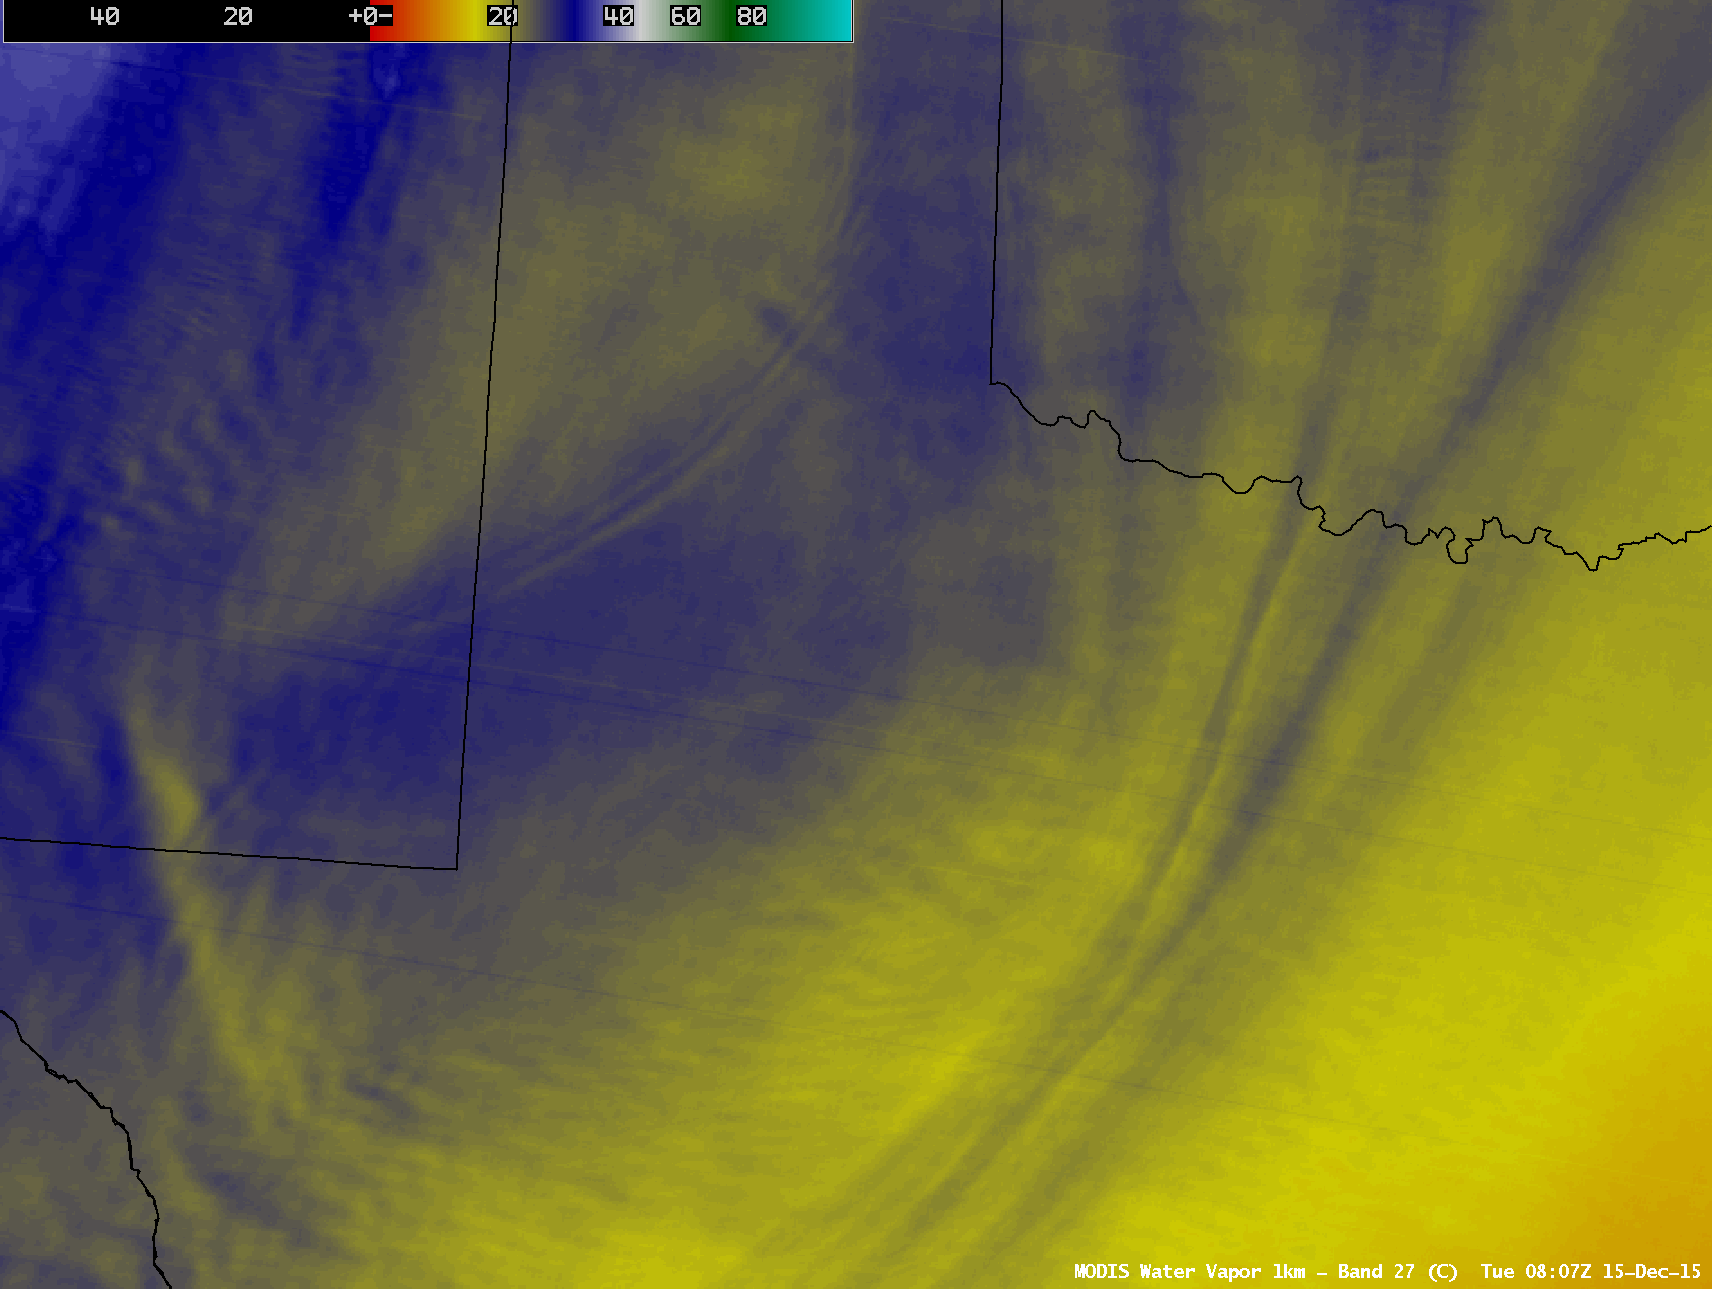 Aqua MODIS Water Vapor (6.7 µm) and Infrared (11.0 µm) images [click to enlarge]